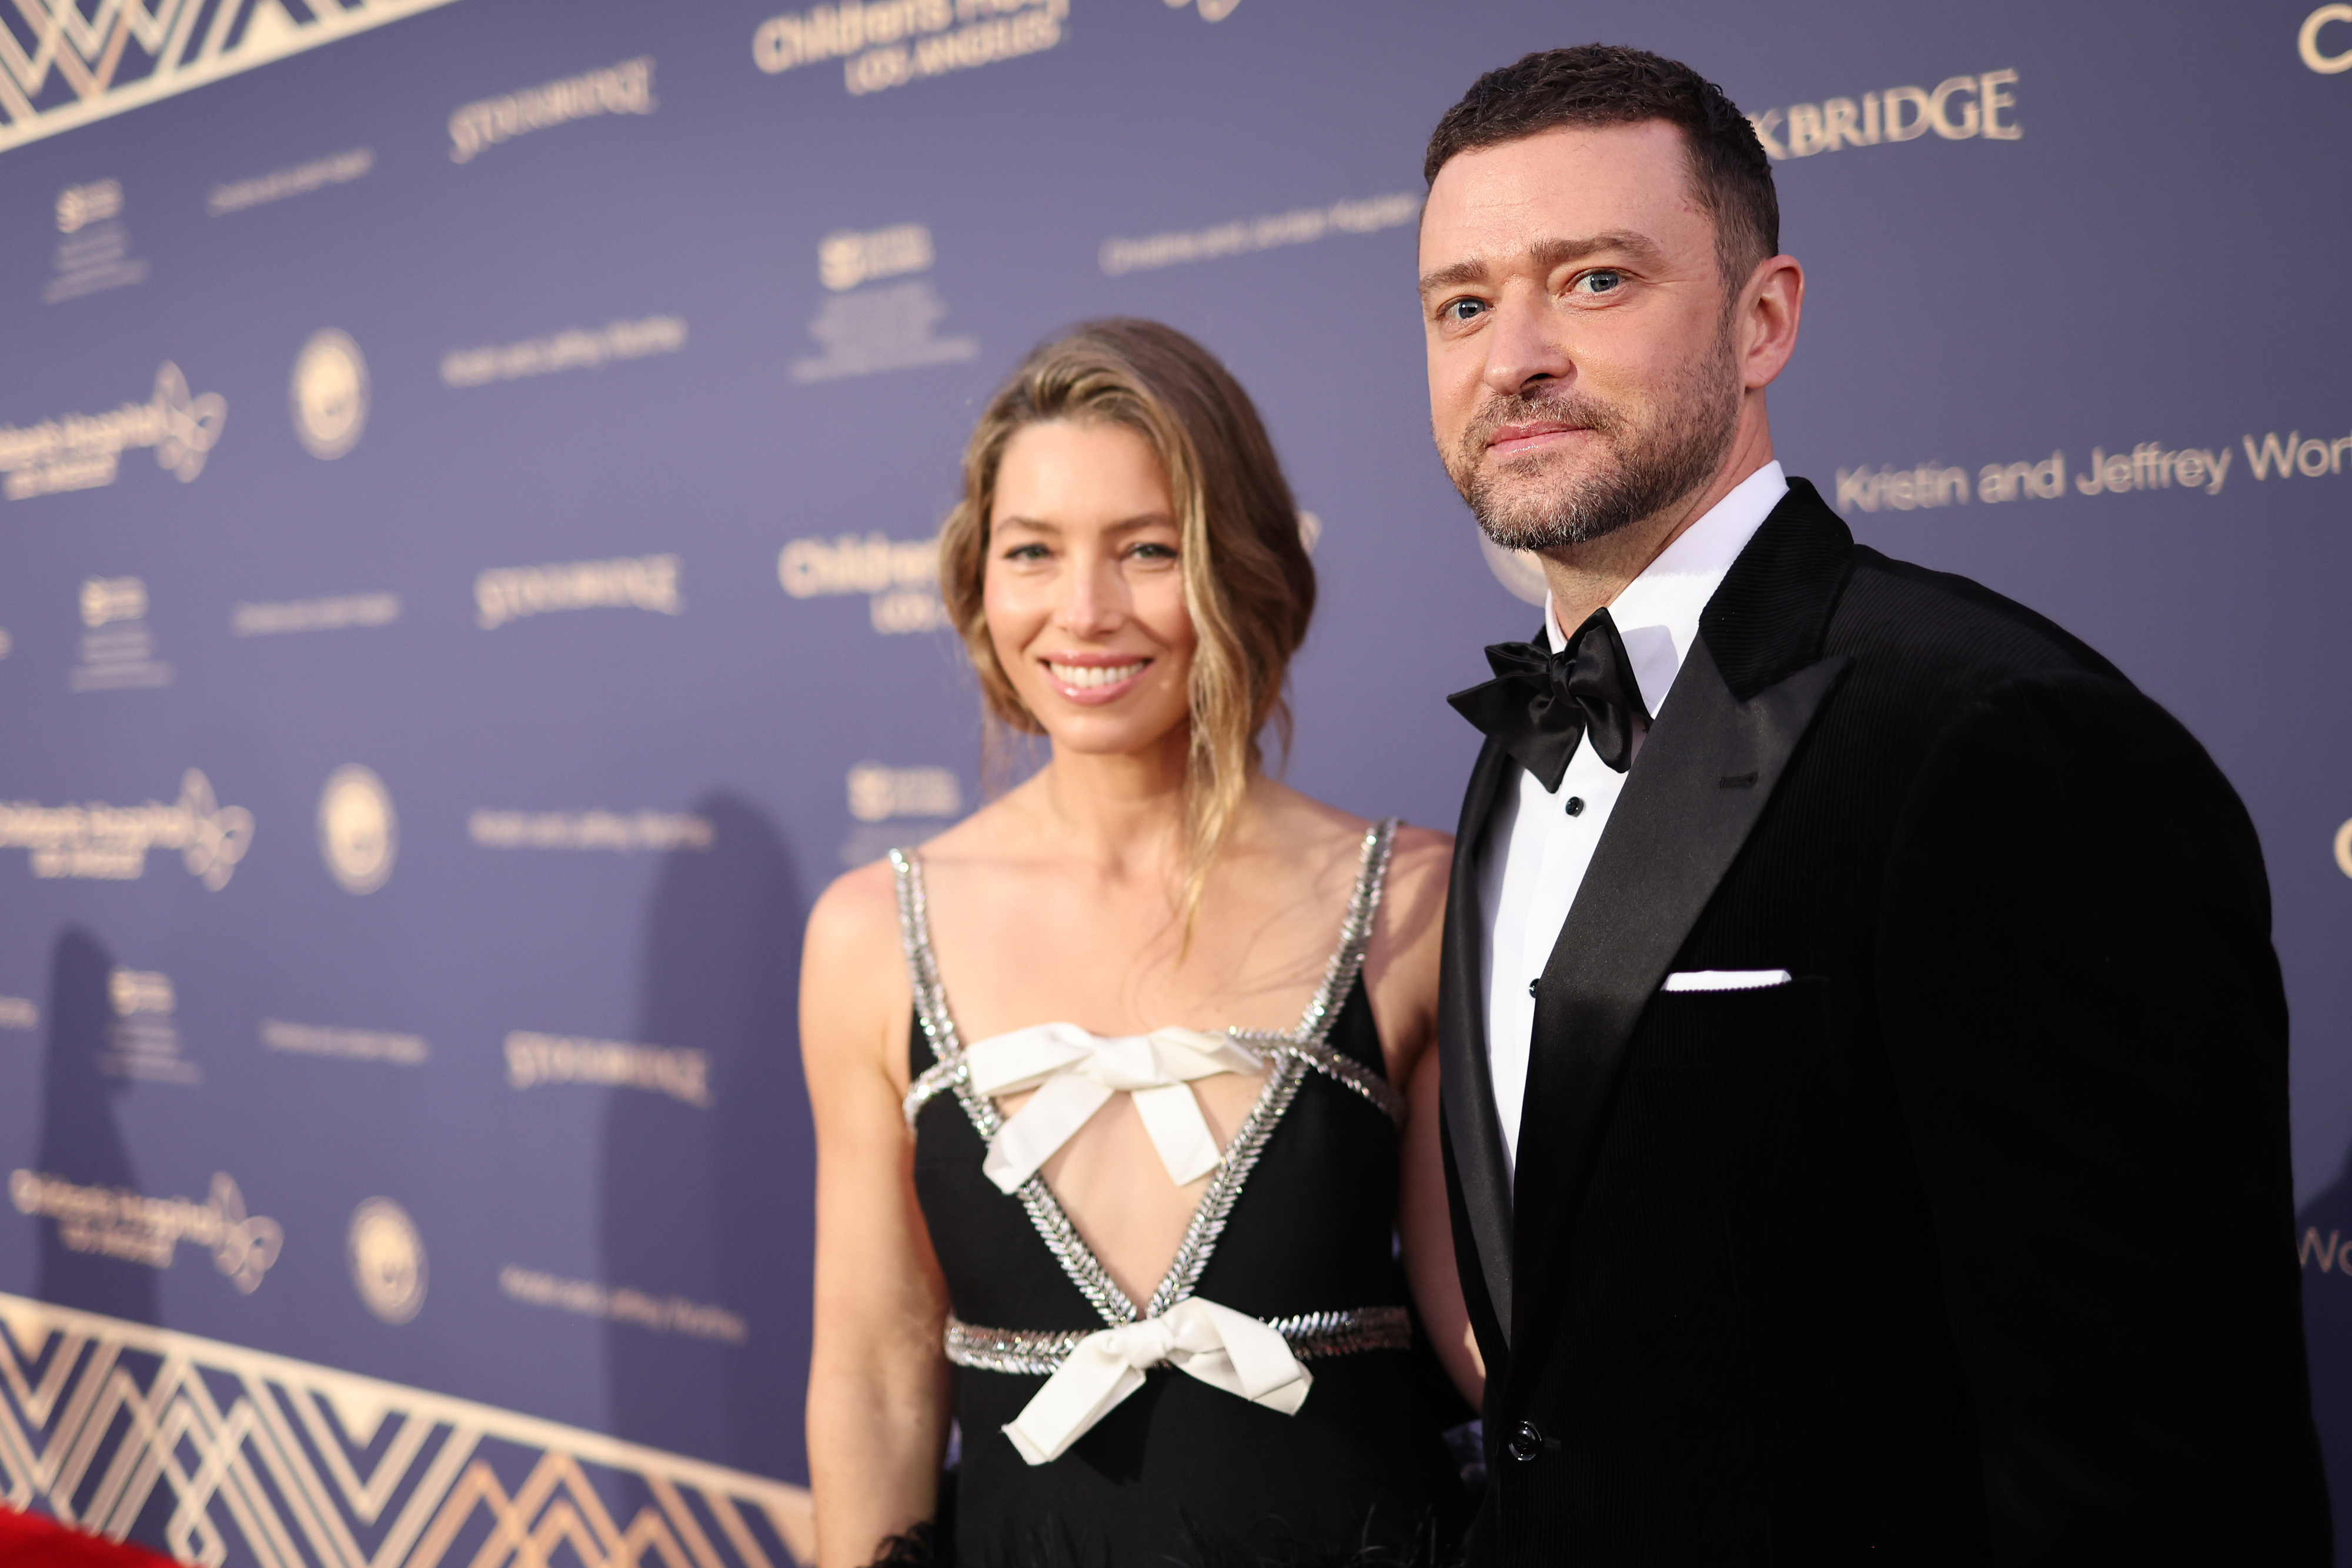 Jessica Biel and Justin Timberlake on the red carpet